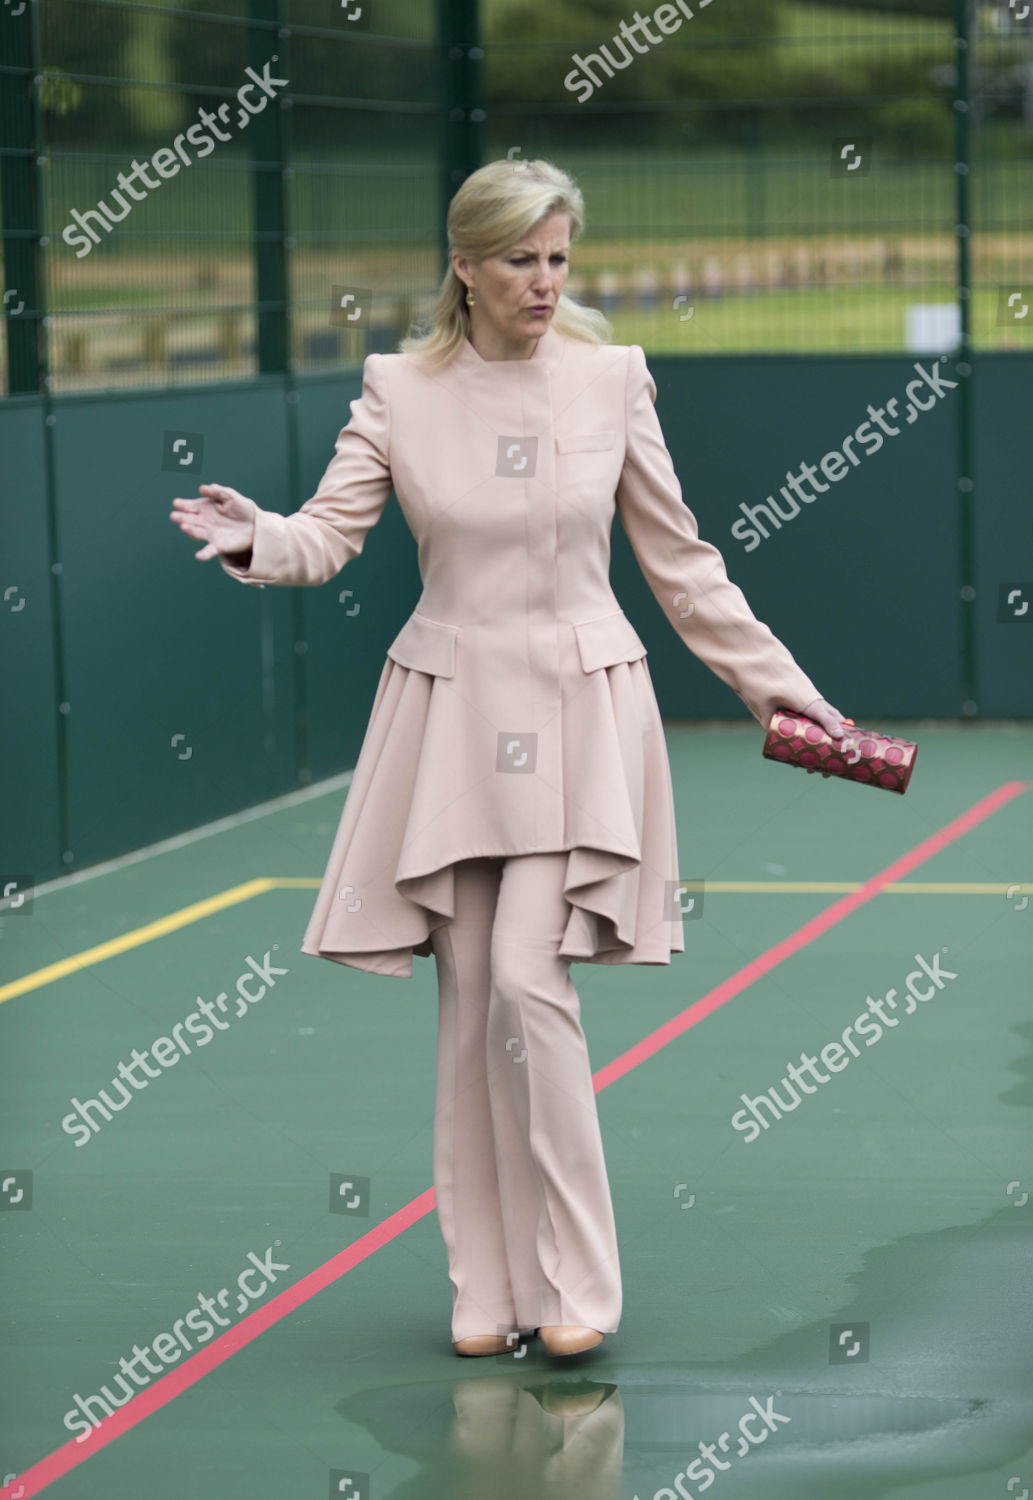 sophie-countess-of-wessex-visits-treloars-college-hampshire-britain-shutterstock-editorial-3787952t.jpg